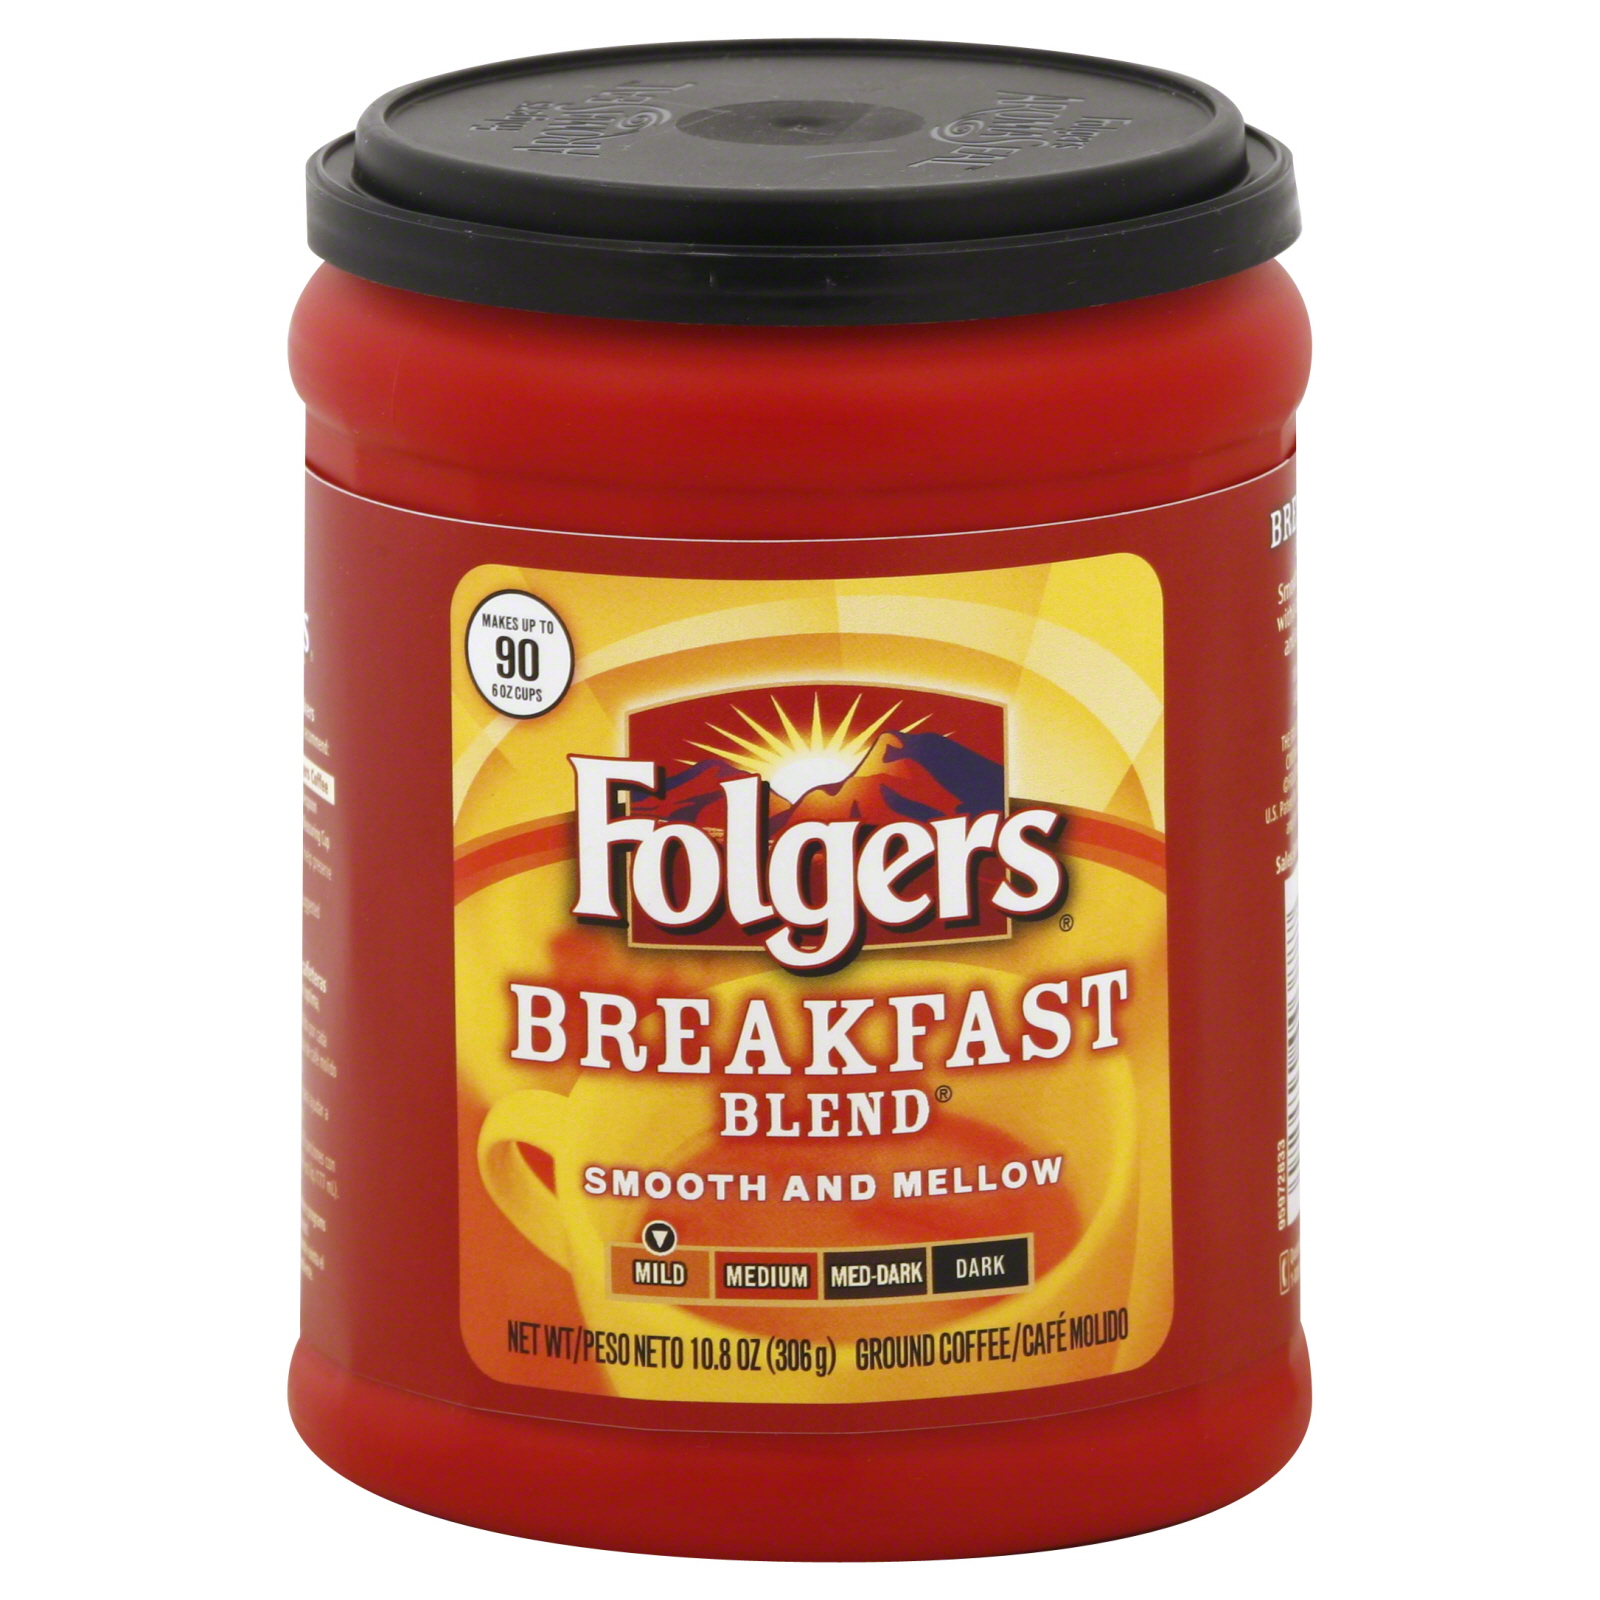 Folgers Breakfast Blend Ground Coffee Mild Product Image